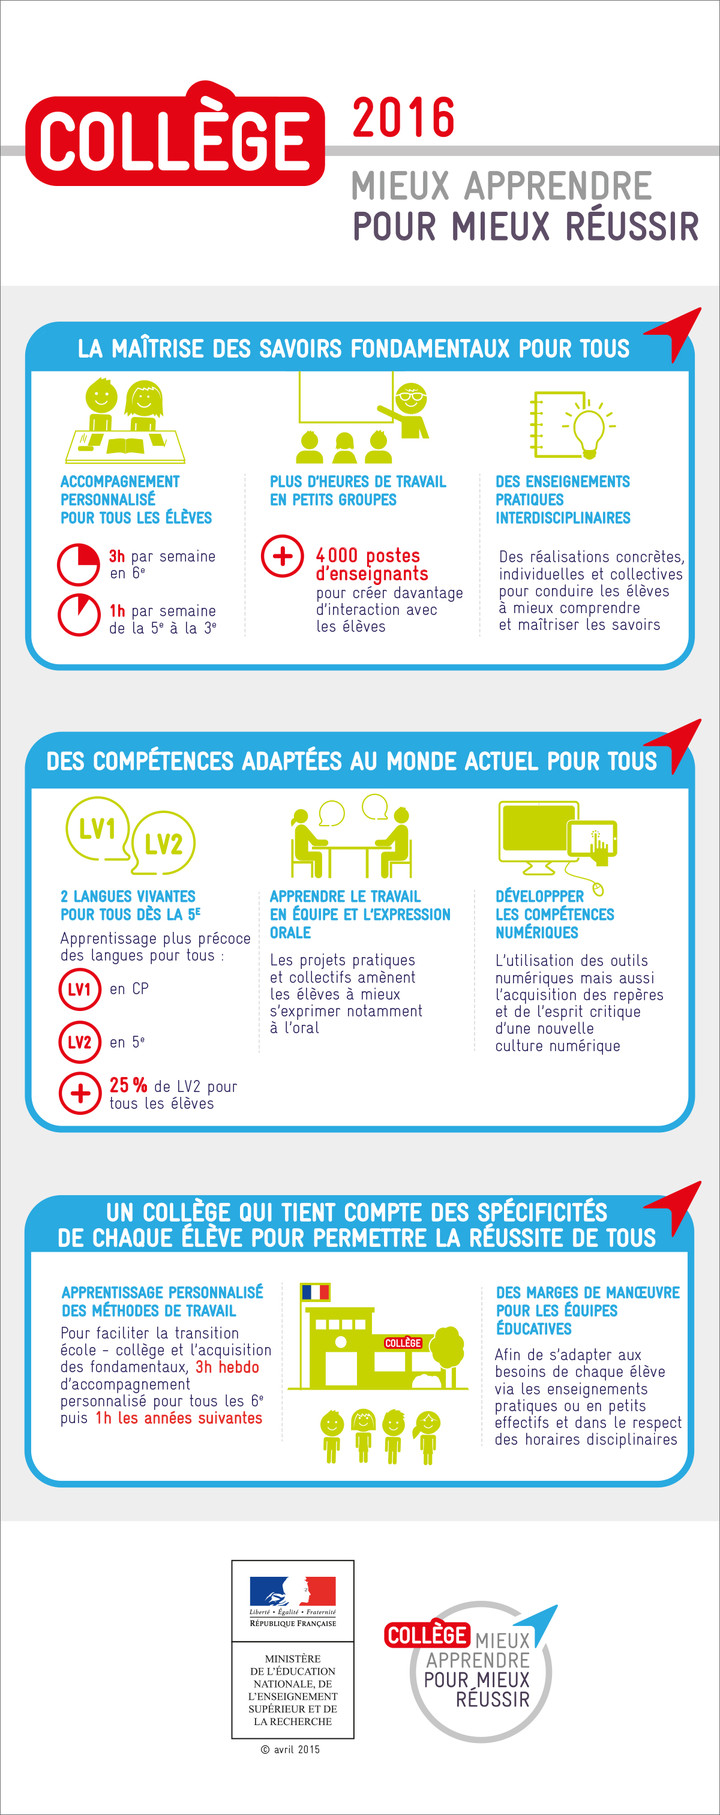 infographie_college_2016_418068.89